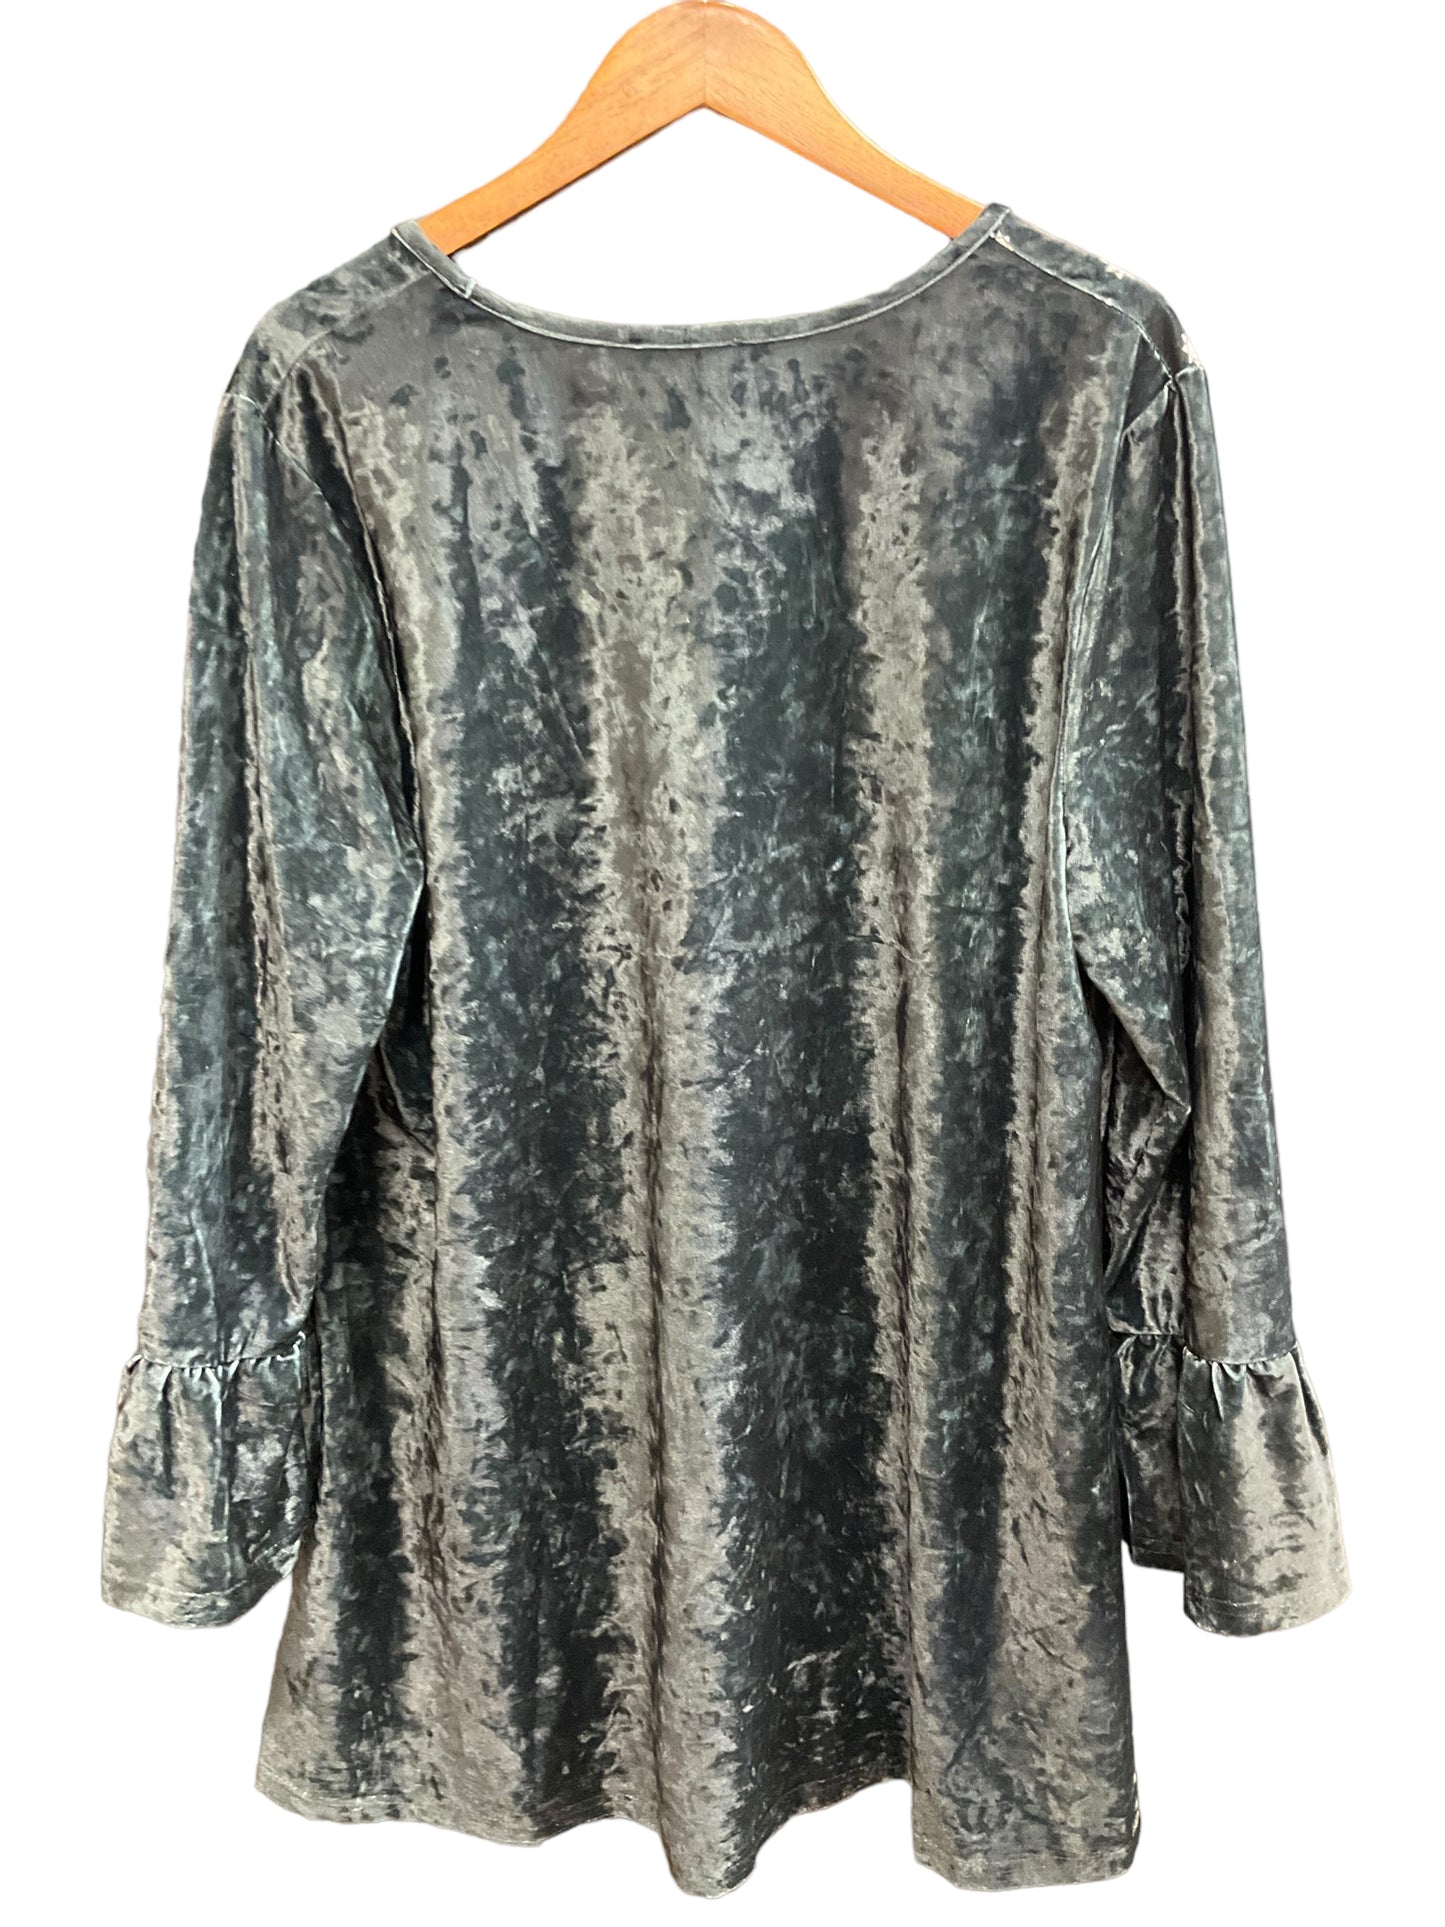 Top Long Sleeve By Lily  Size: 2x